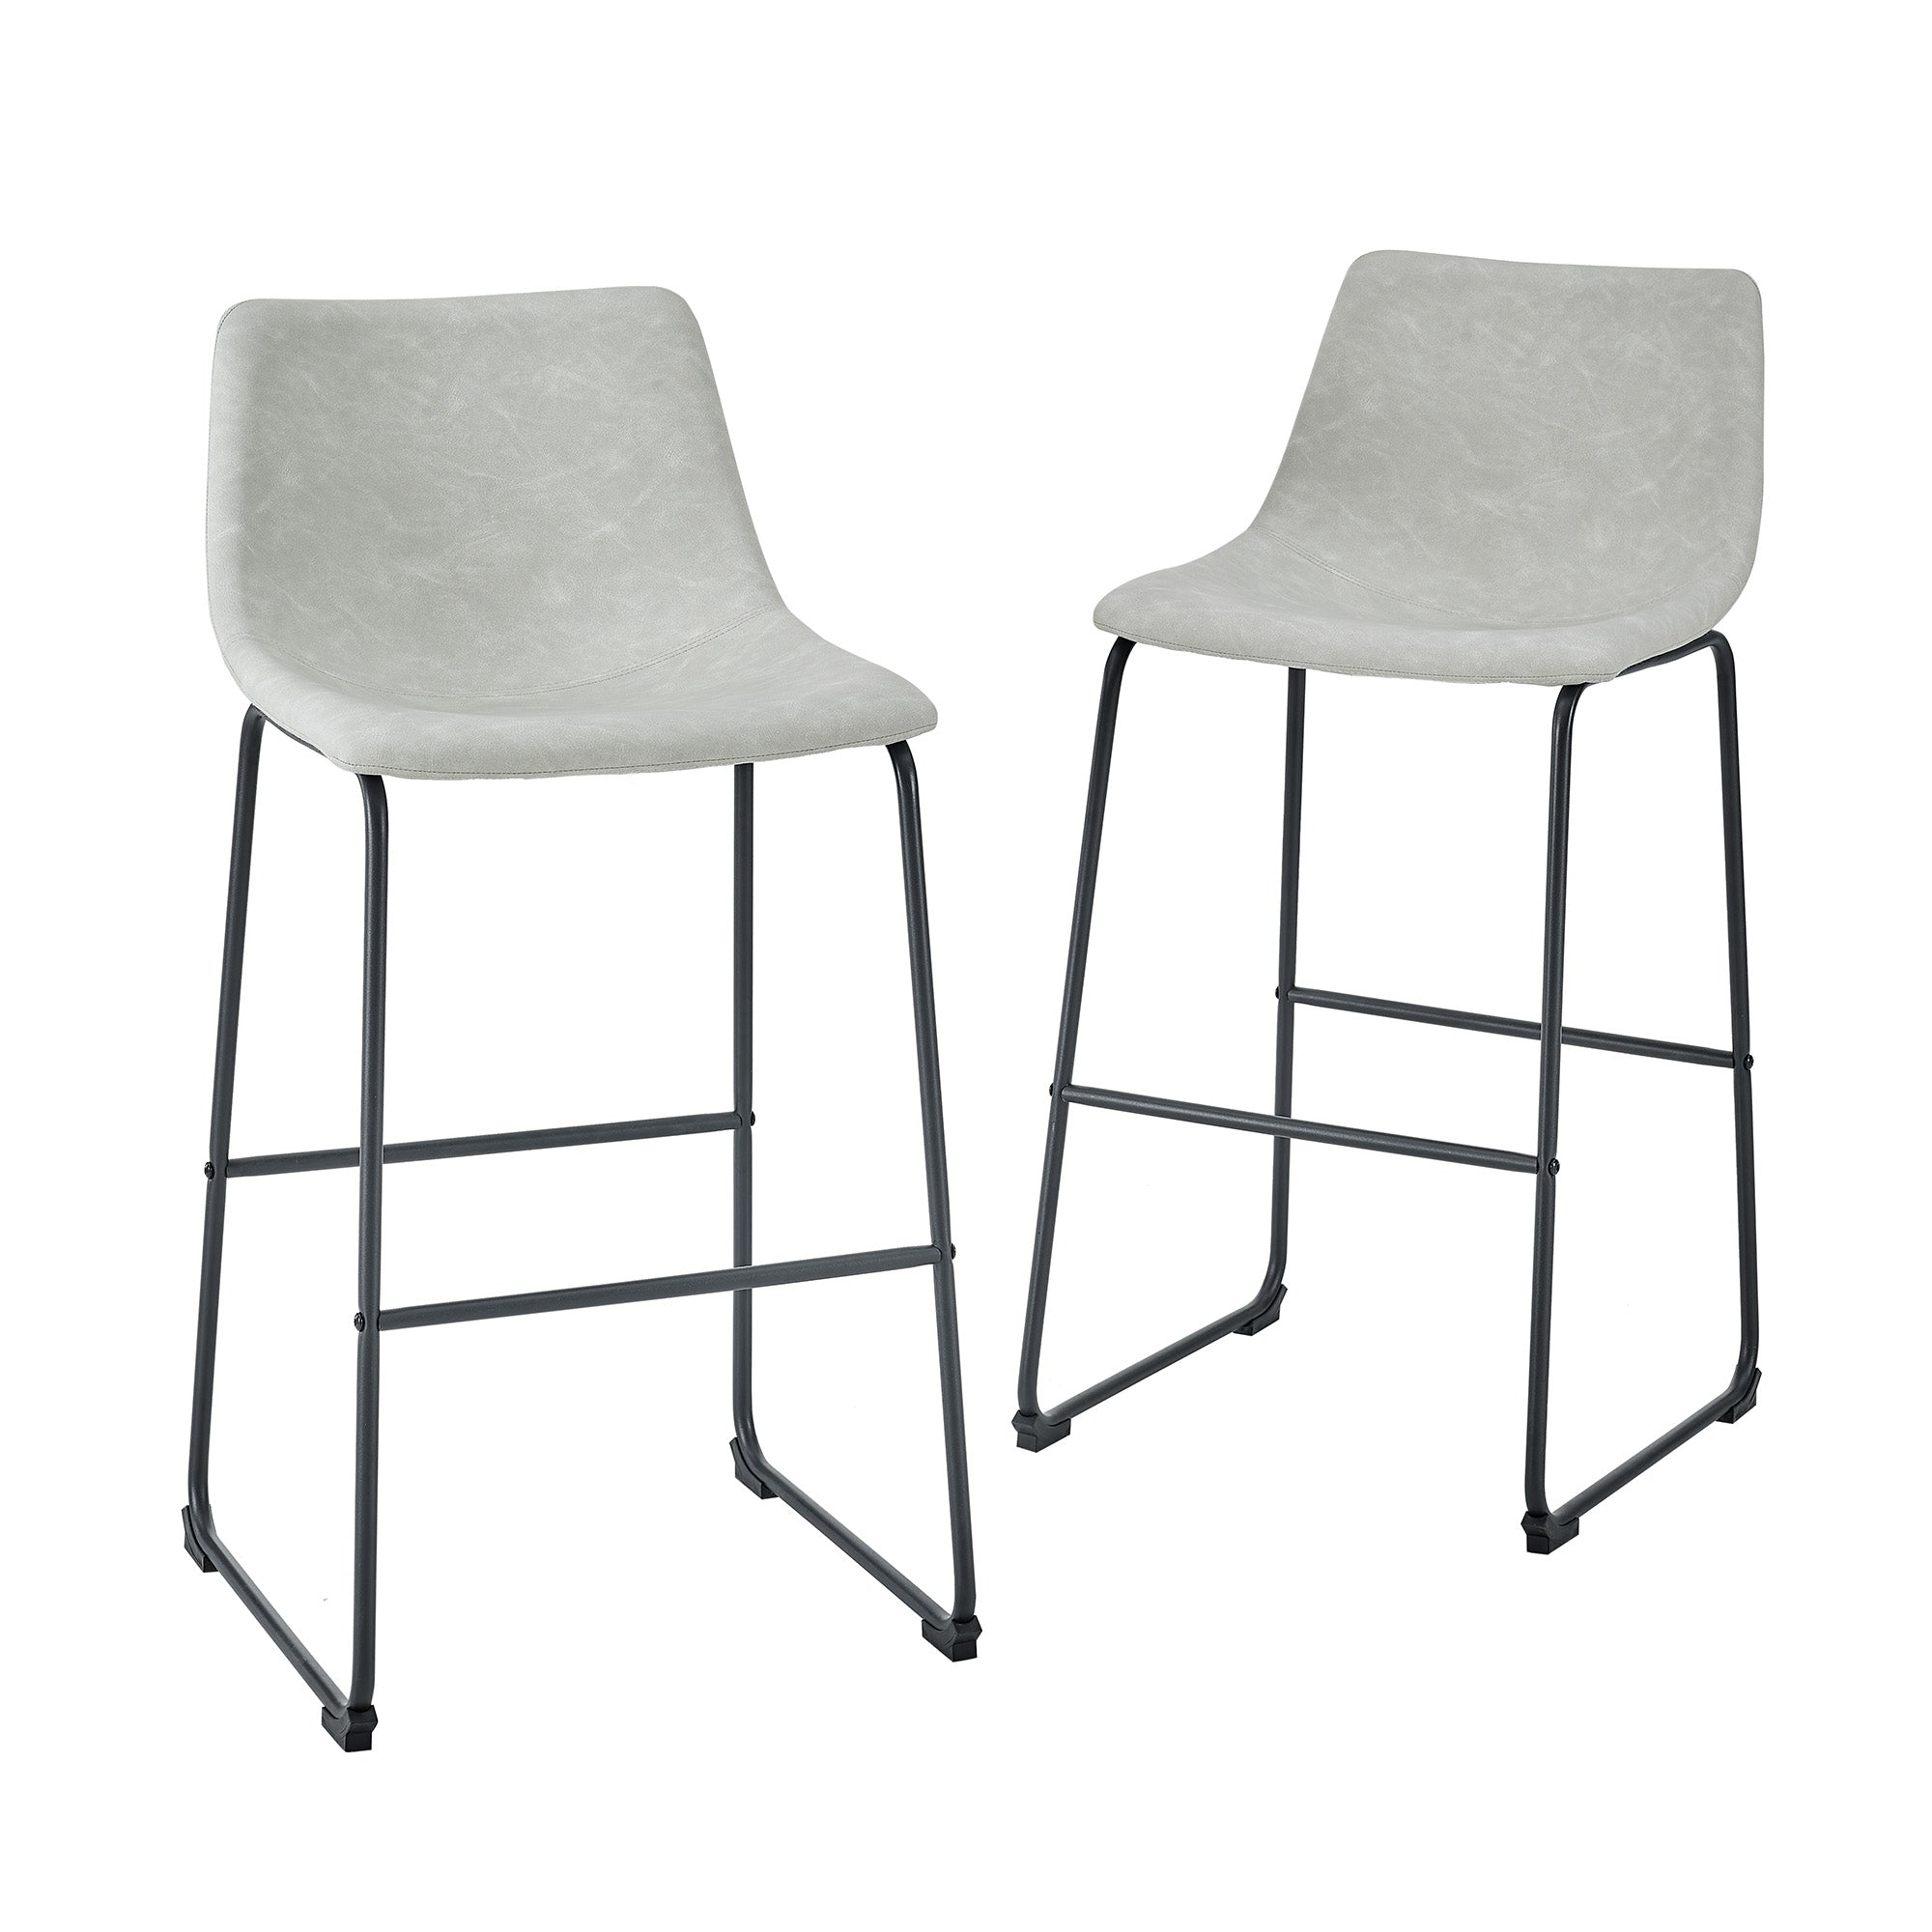 30" Industrial Faux Leather Barstools Set of 2 - East Shore Modern Home Furnishings